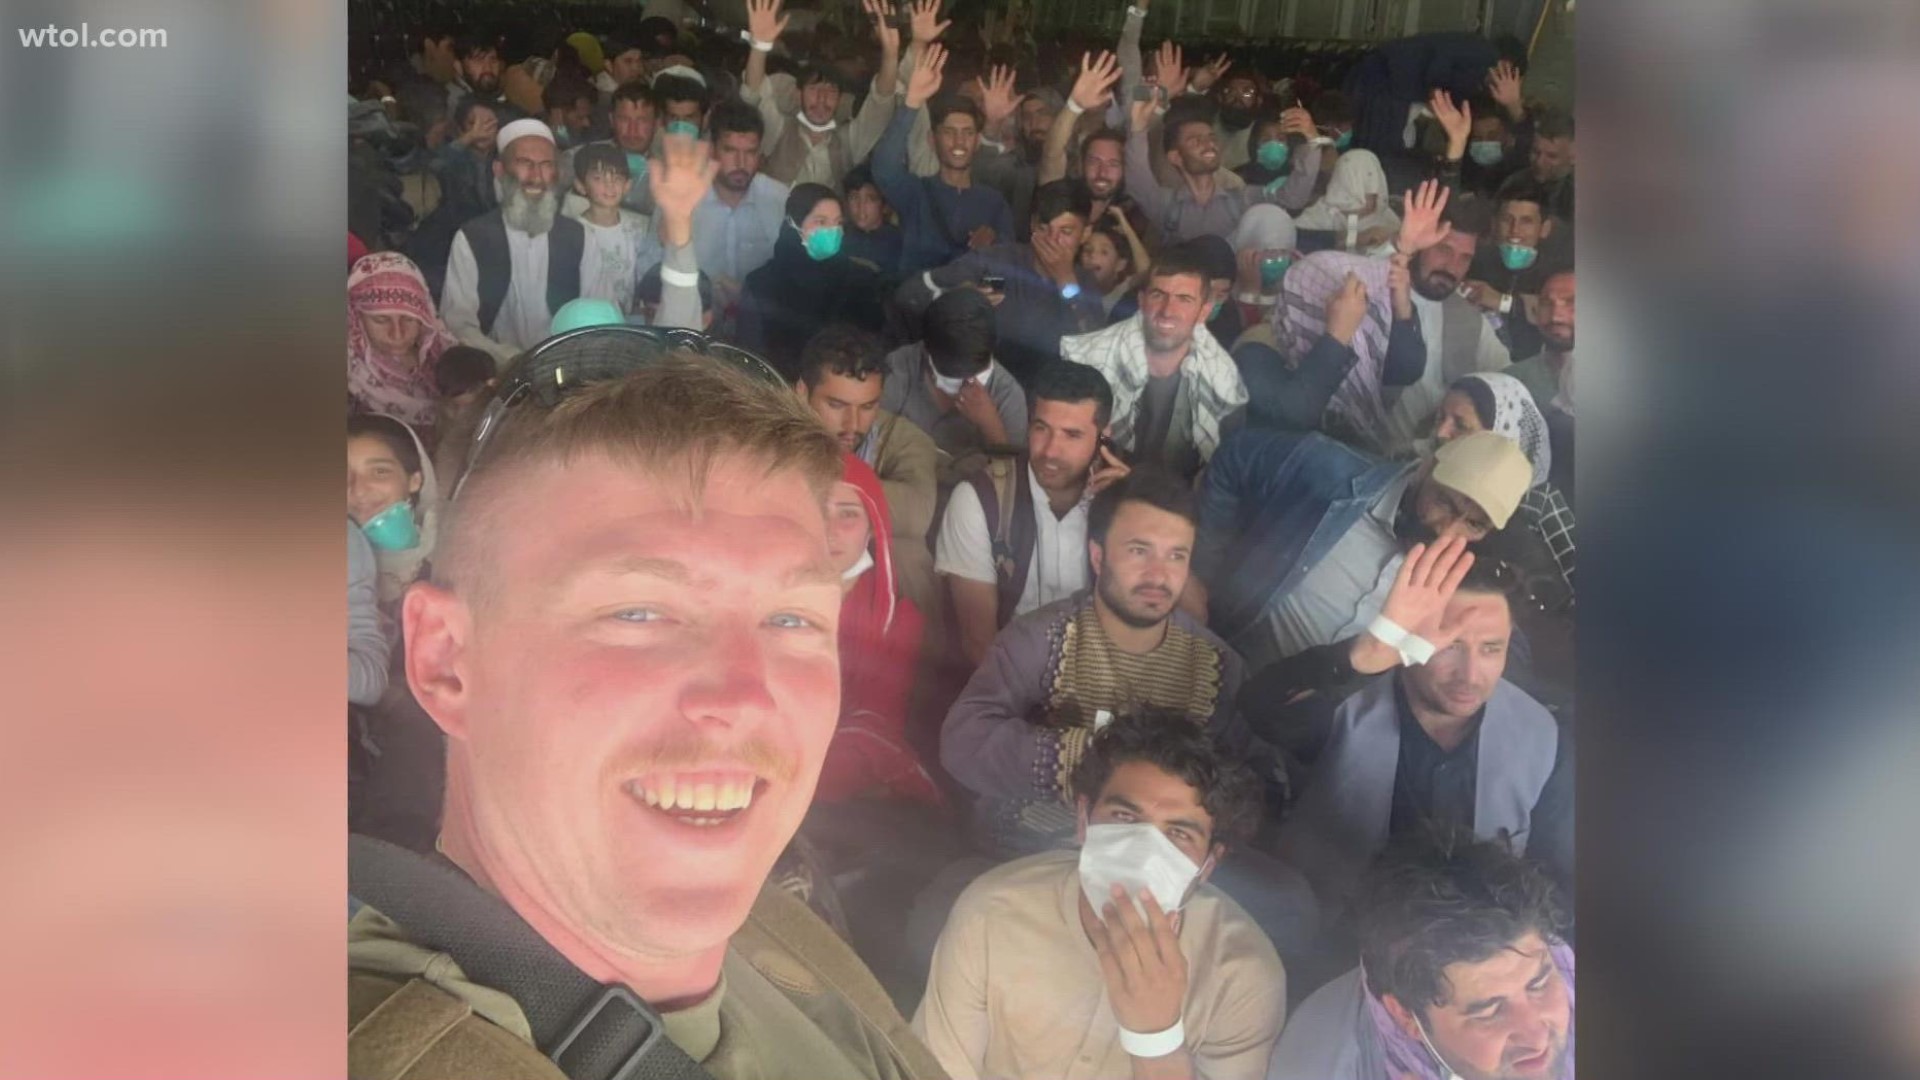 In Defiance, Austin Carr is a teacher and a coach for the Bulldogs. For the past 10 days, Master Sgt. Carr has been in Kabul assisting evacuees.